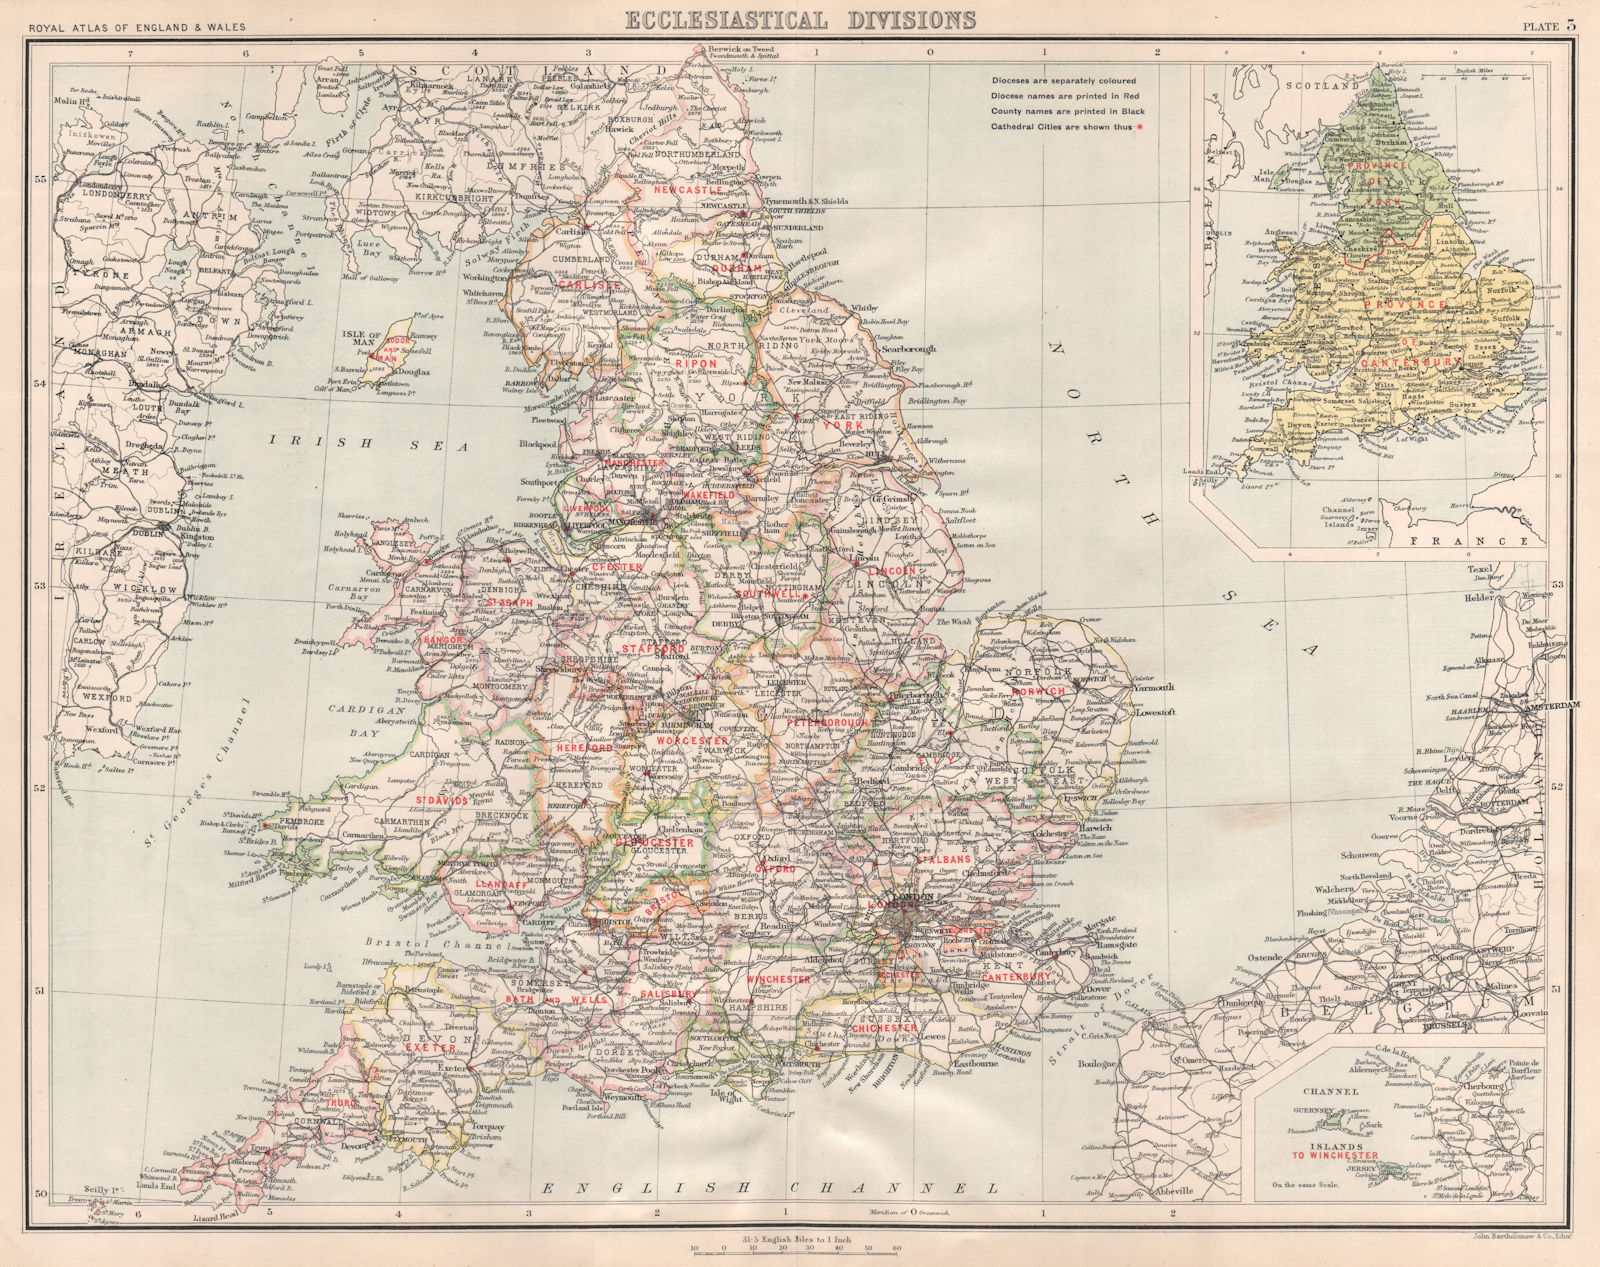 Associate Product ENGLAND & WALES Ecclesiastical Divisions Dioceses Cathedral Cities 1898 map